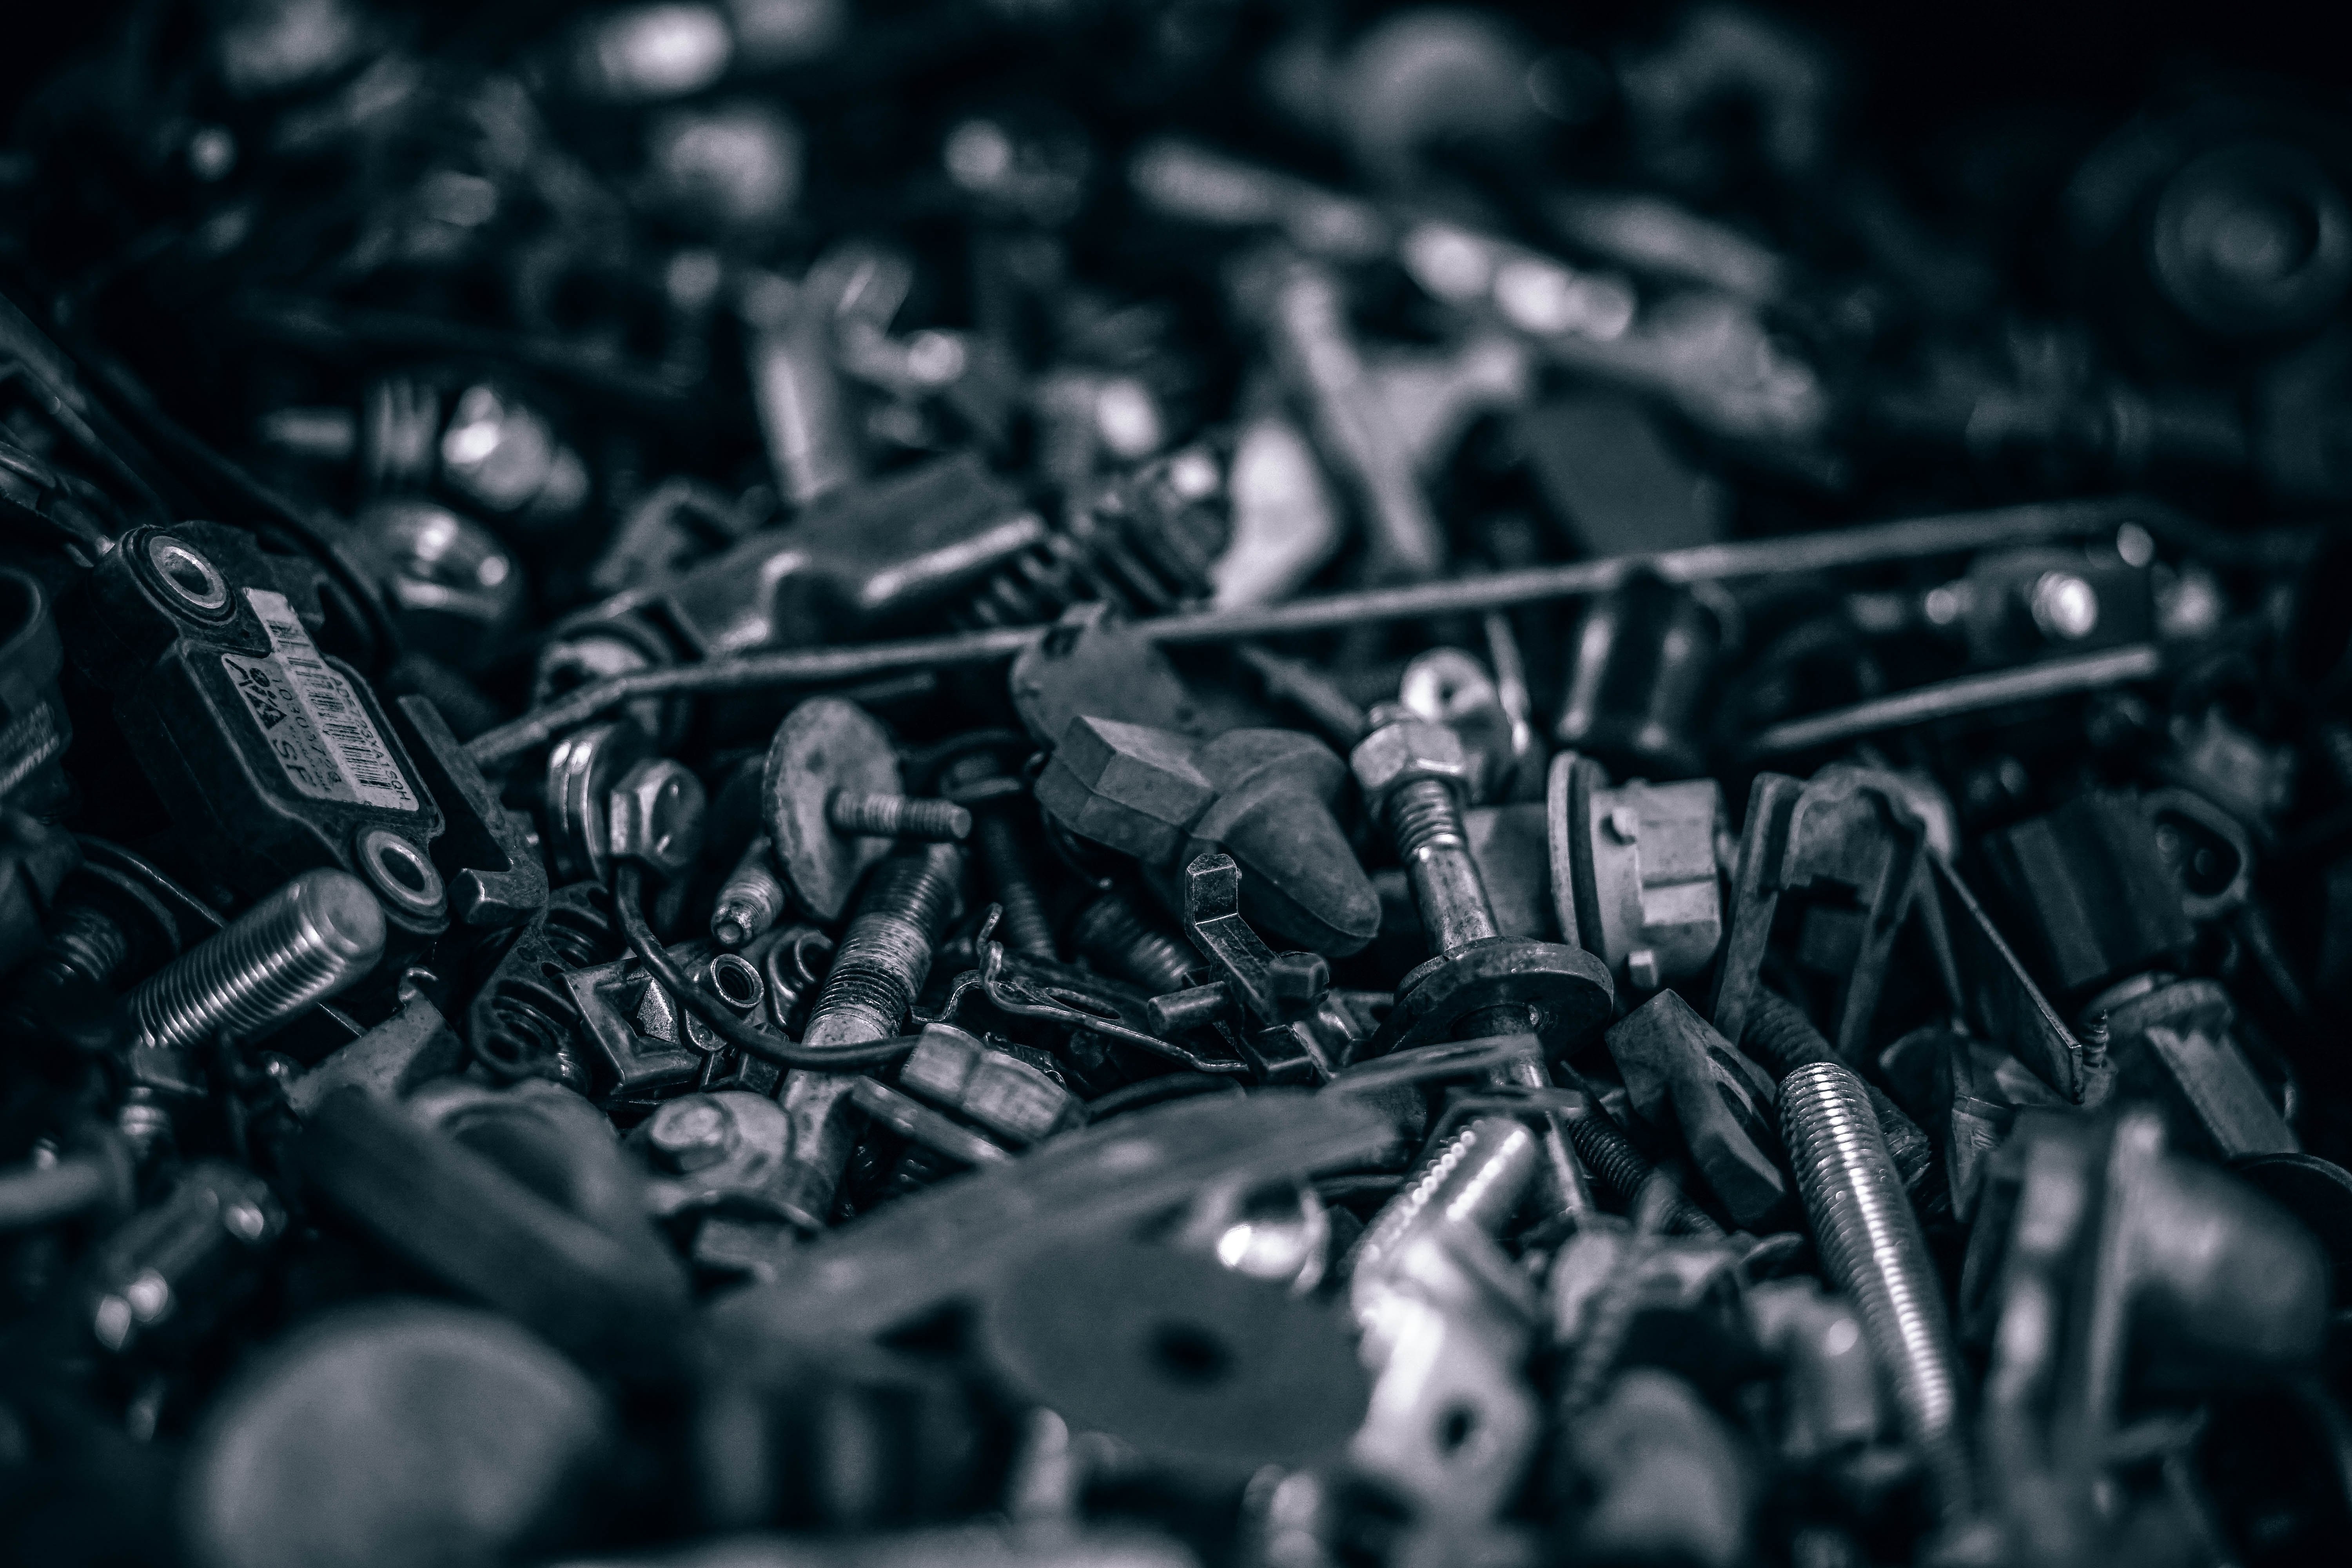 6000x4000 parts, car, service, closeup, instrument, workshop, black and white, auto, set, engineer, metals, repair, wrench, box, mechanical, background, tool, dark, black, Public domain image, mechanic Gallery HD Wallpaper